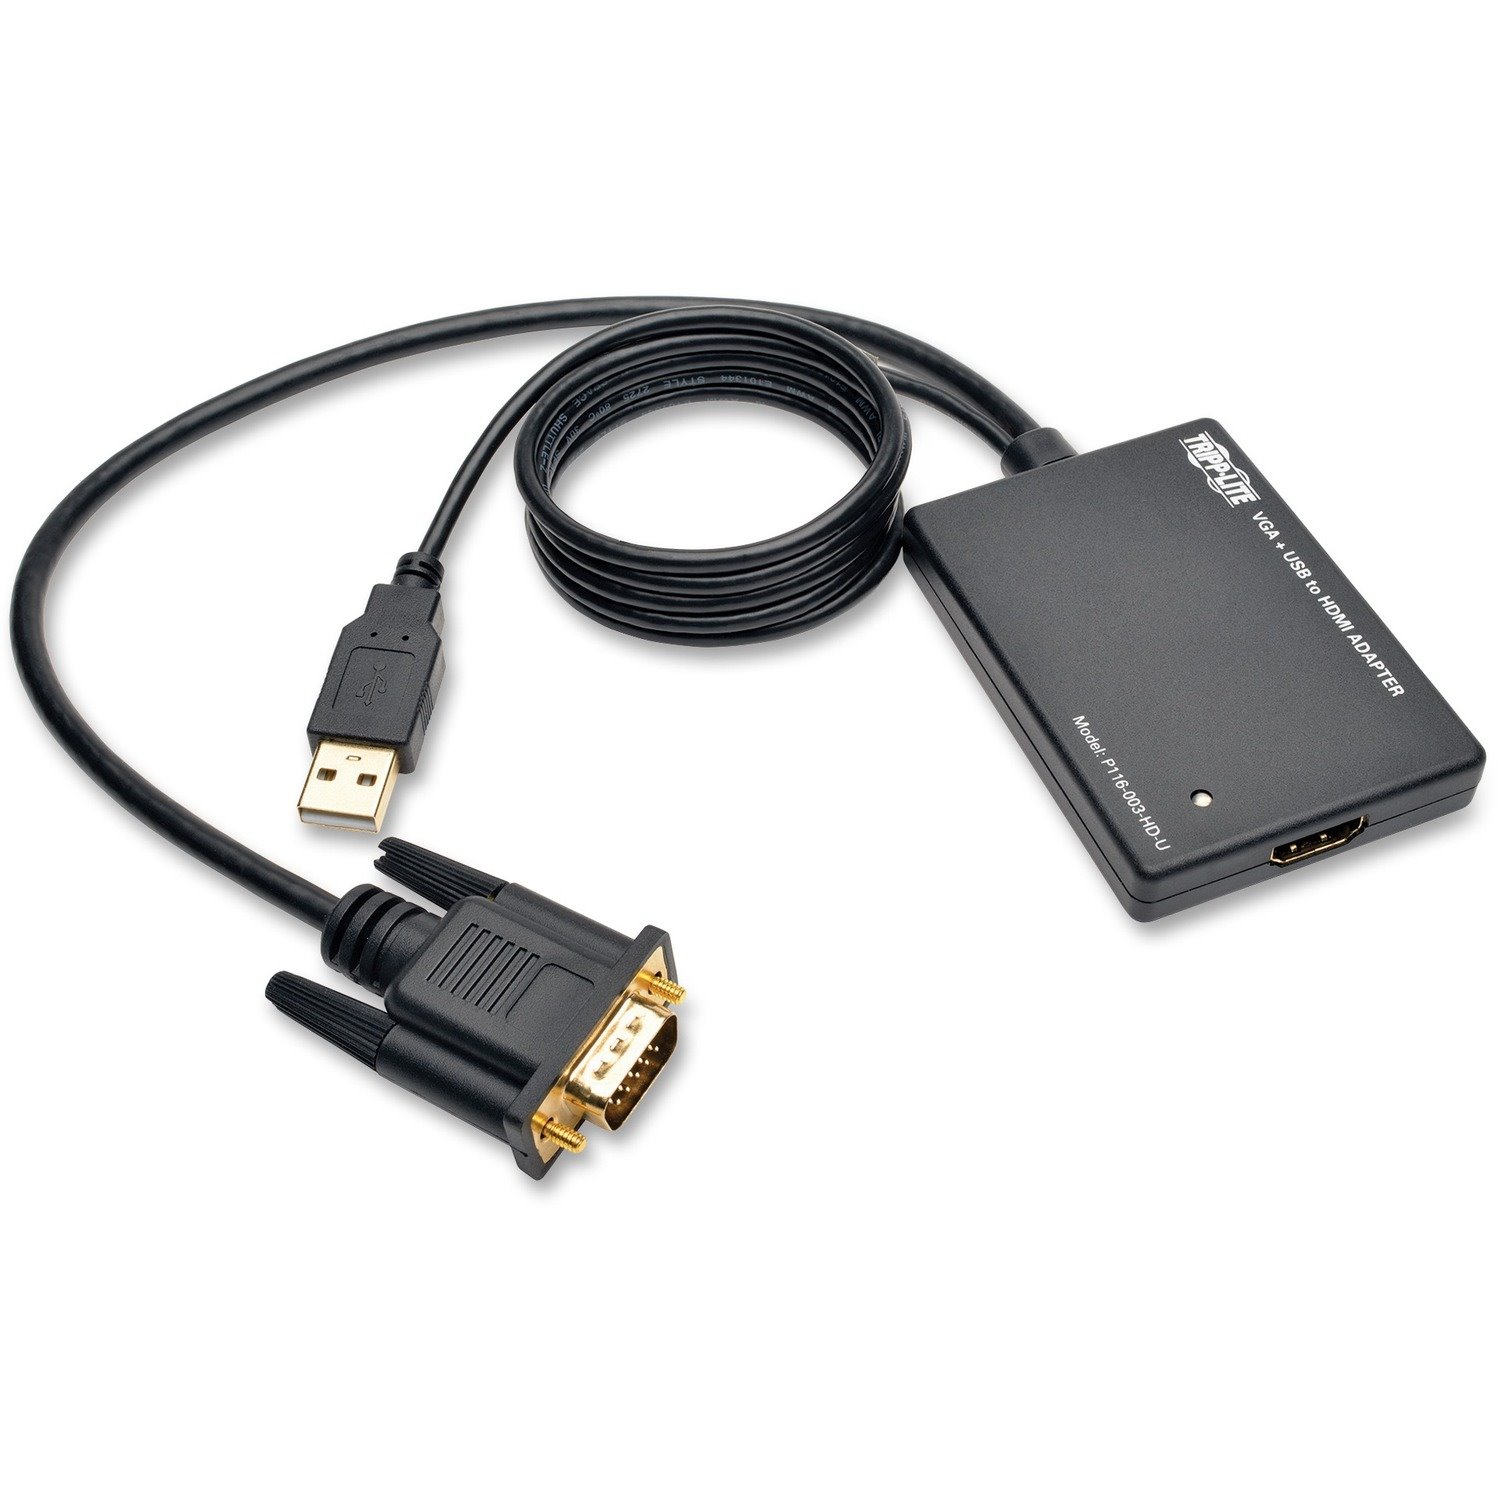 Eaton Tripp Lite Series VGA to HDMI Active Adapter Cable with Audio and USB Power (M/F), 1080p, 6 in. (15.2 cm)